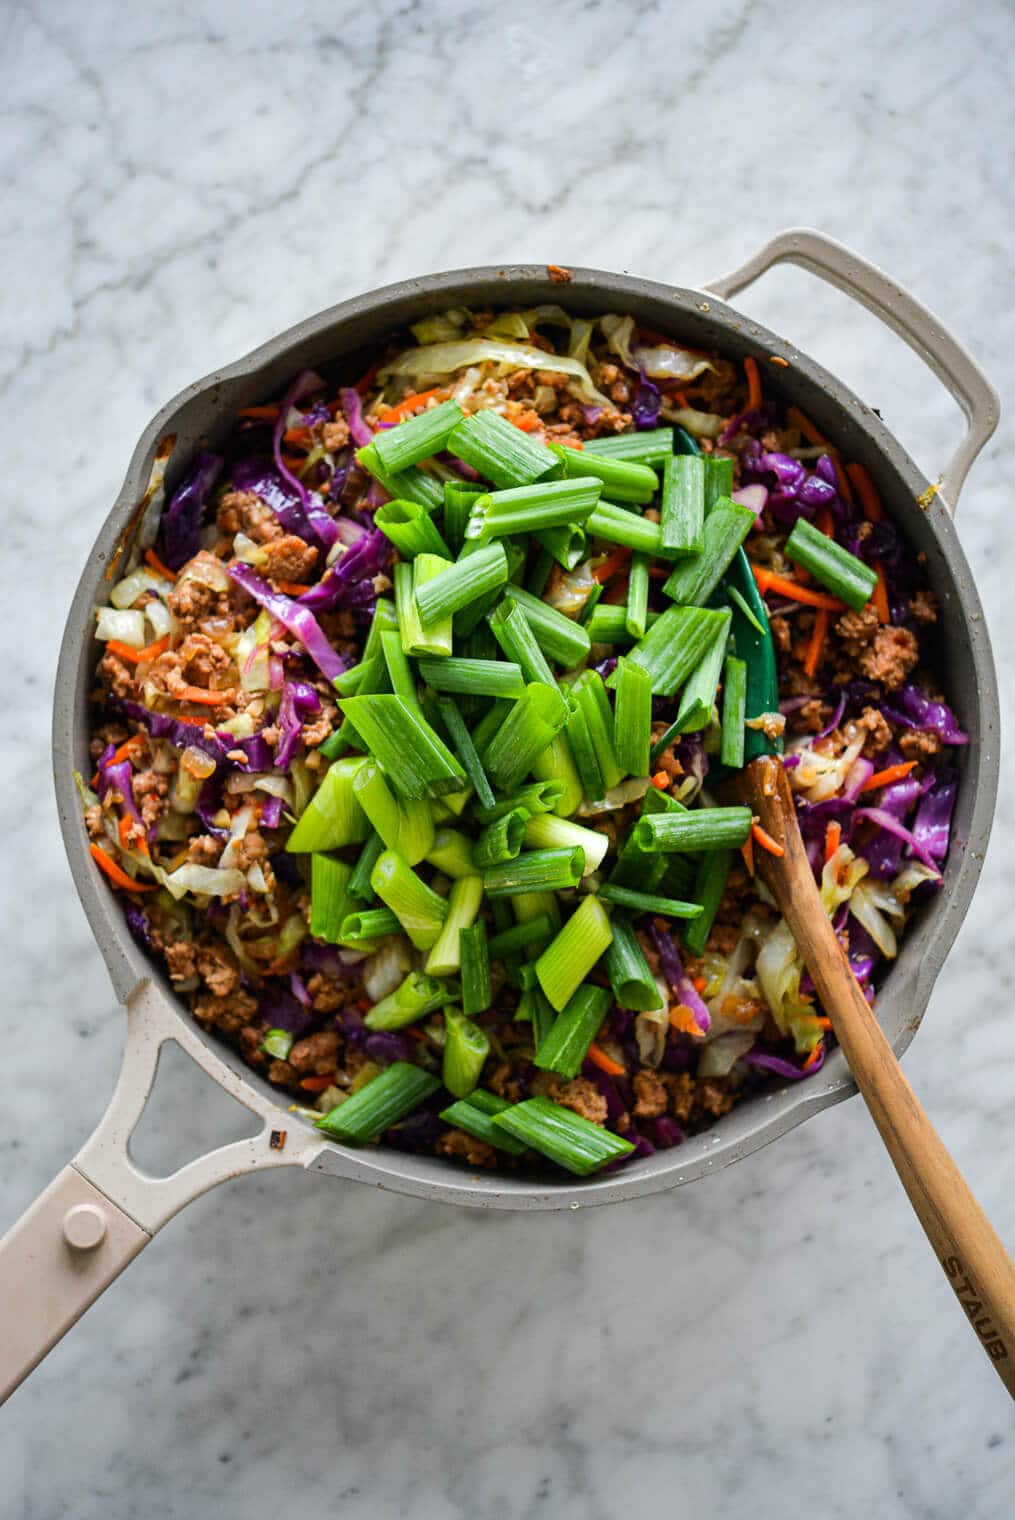 Sauté pan with egg roll in a bowl with vibrant colors of purple, orange, and green topped with sliced green onions.